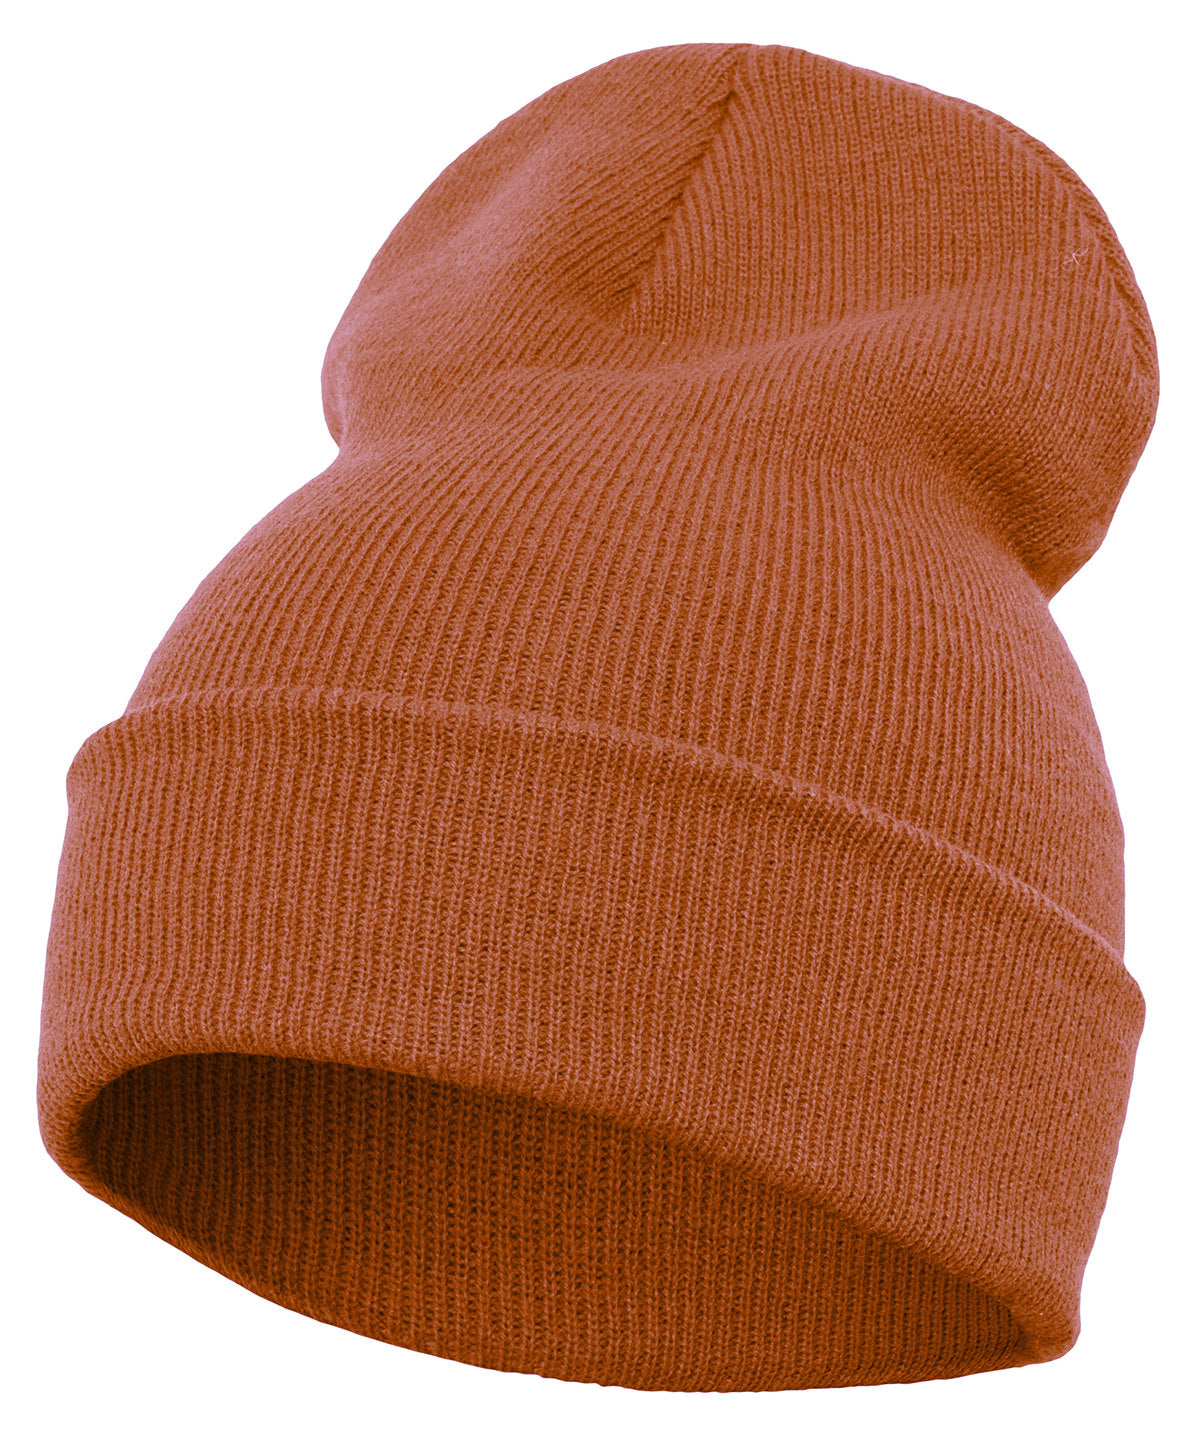 Toffee - Heavyweight long beanie 2023Winter for Colours by HeadwearMust Essentials Yupoong Flexfit (1501KC) HavesNew